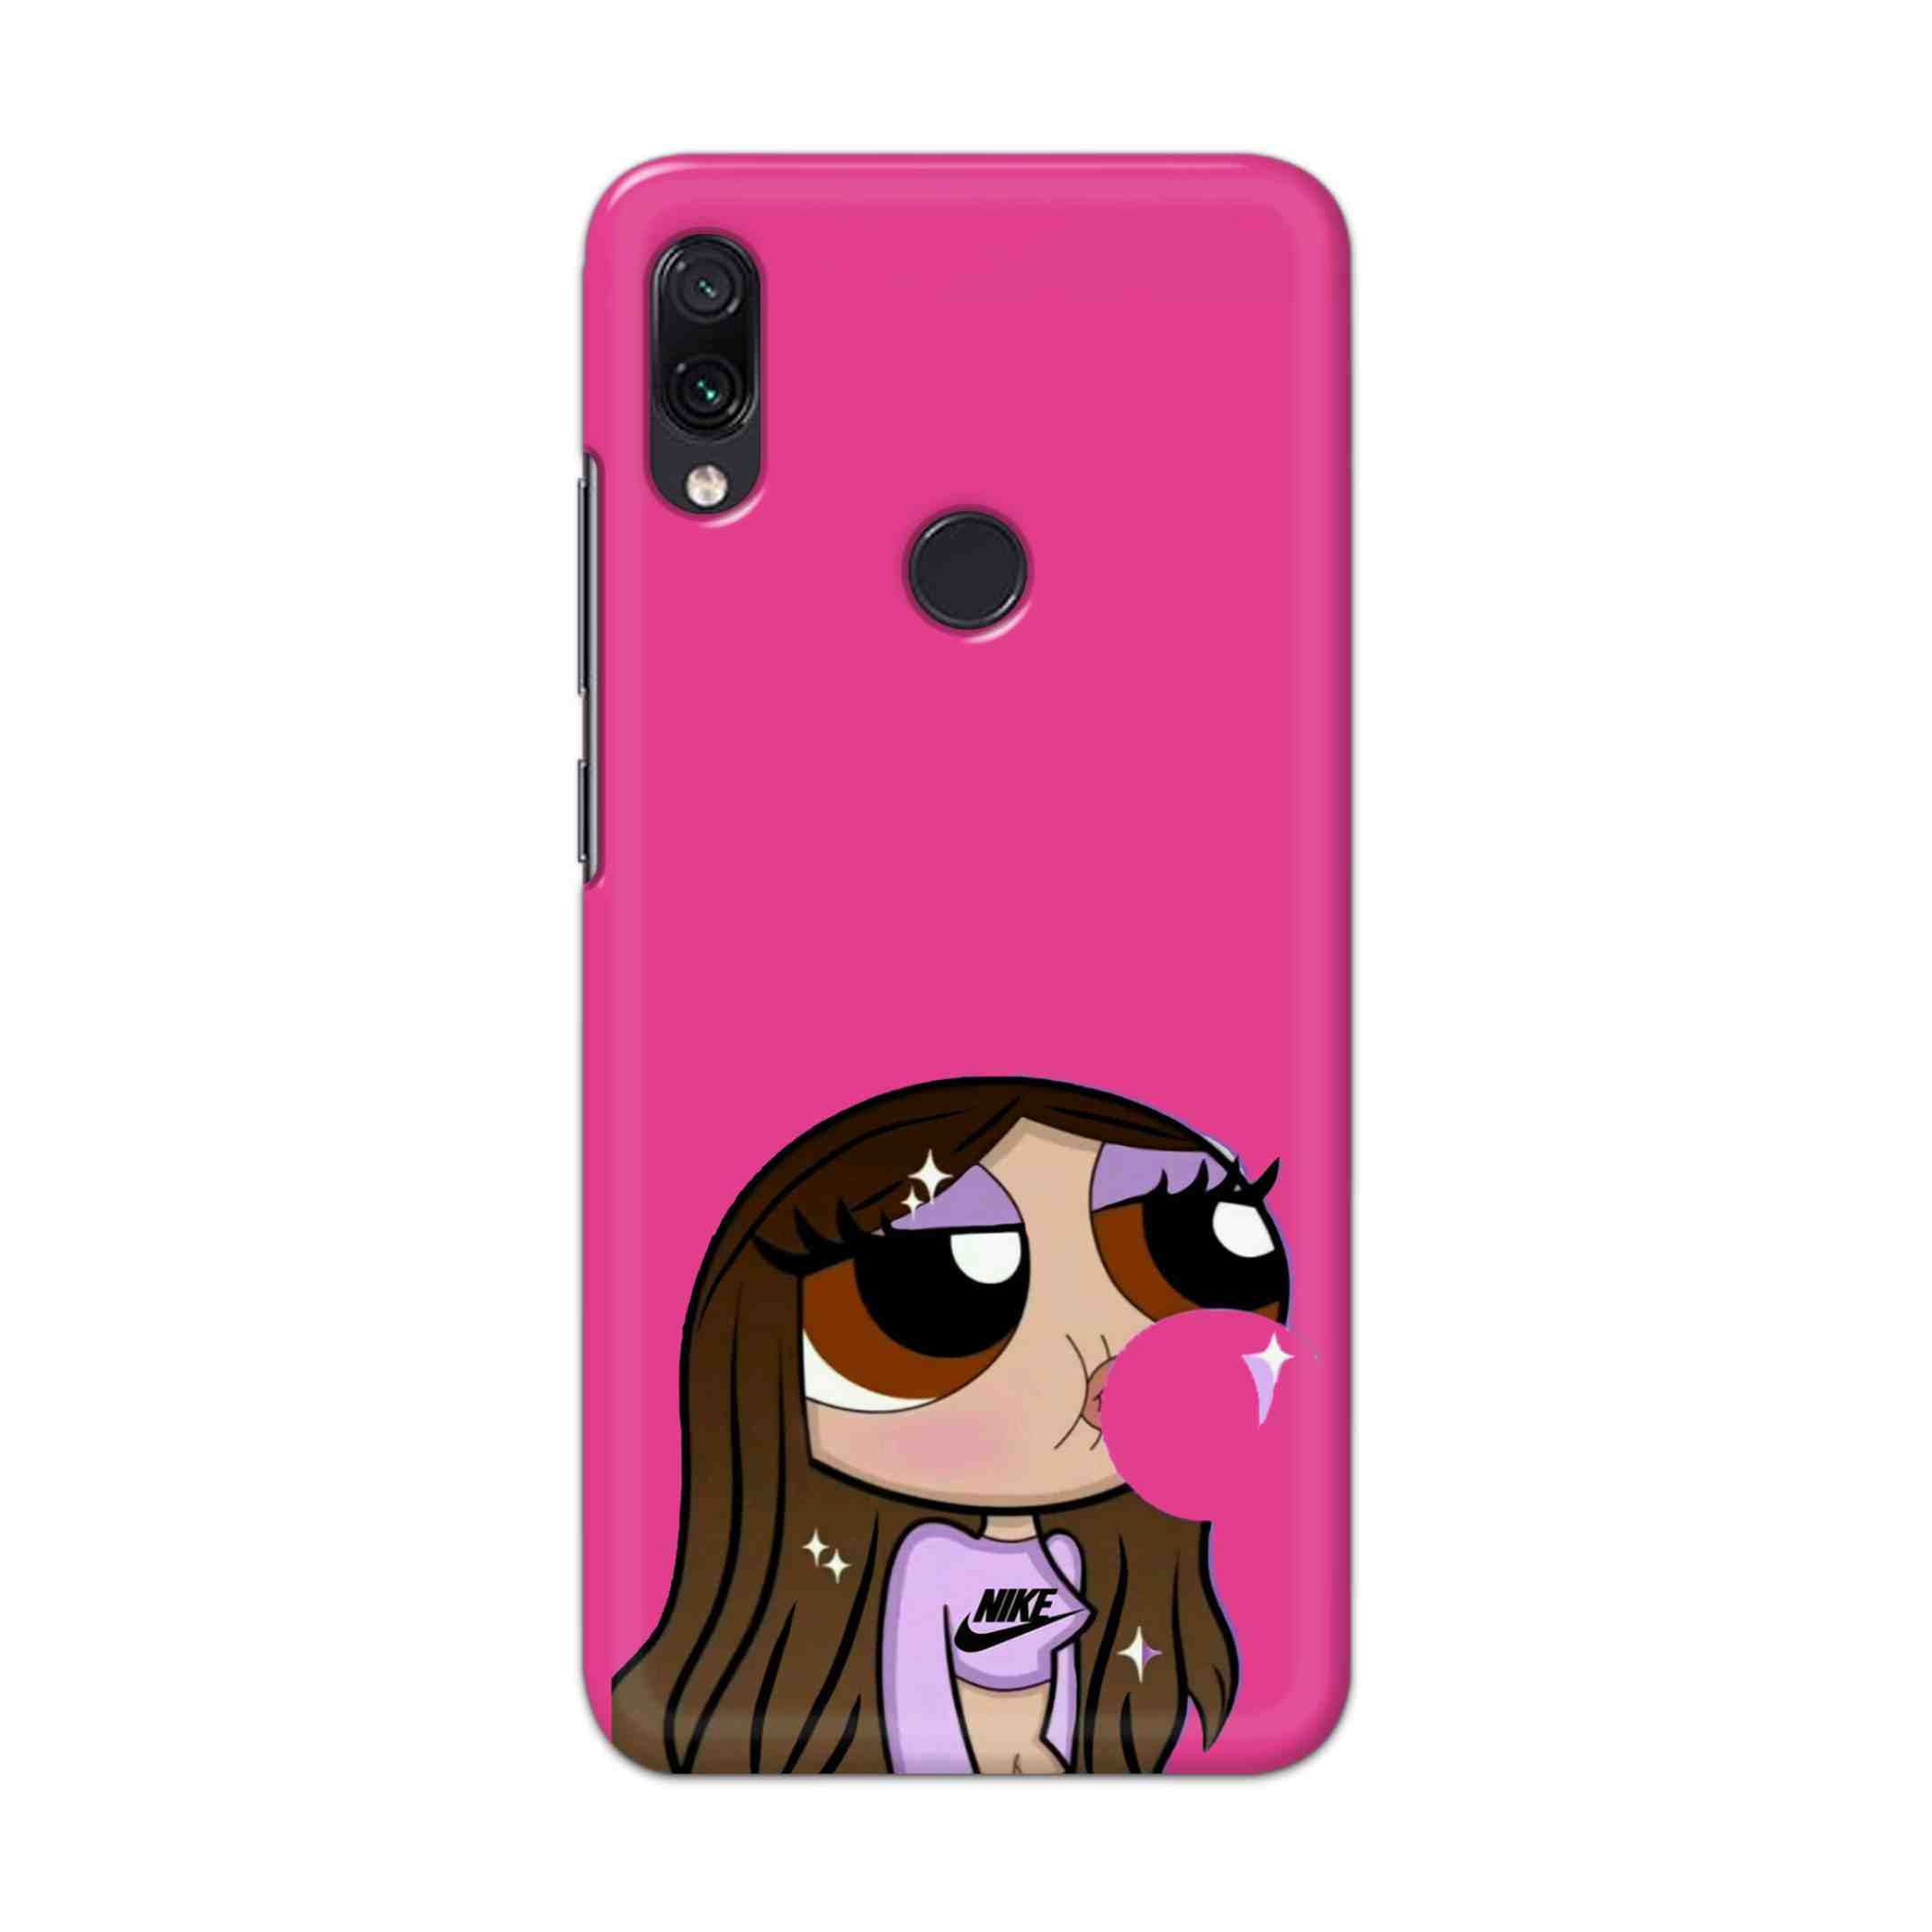 Buy Bubble Girl Hard Back Mobile Phone Case Cover For Redmi Note 7 / Note 7 Pro Online